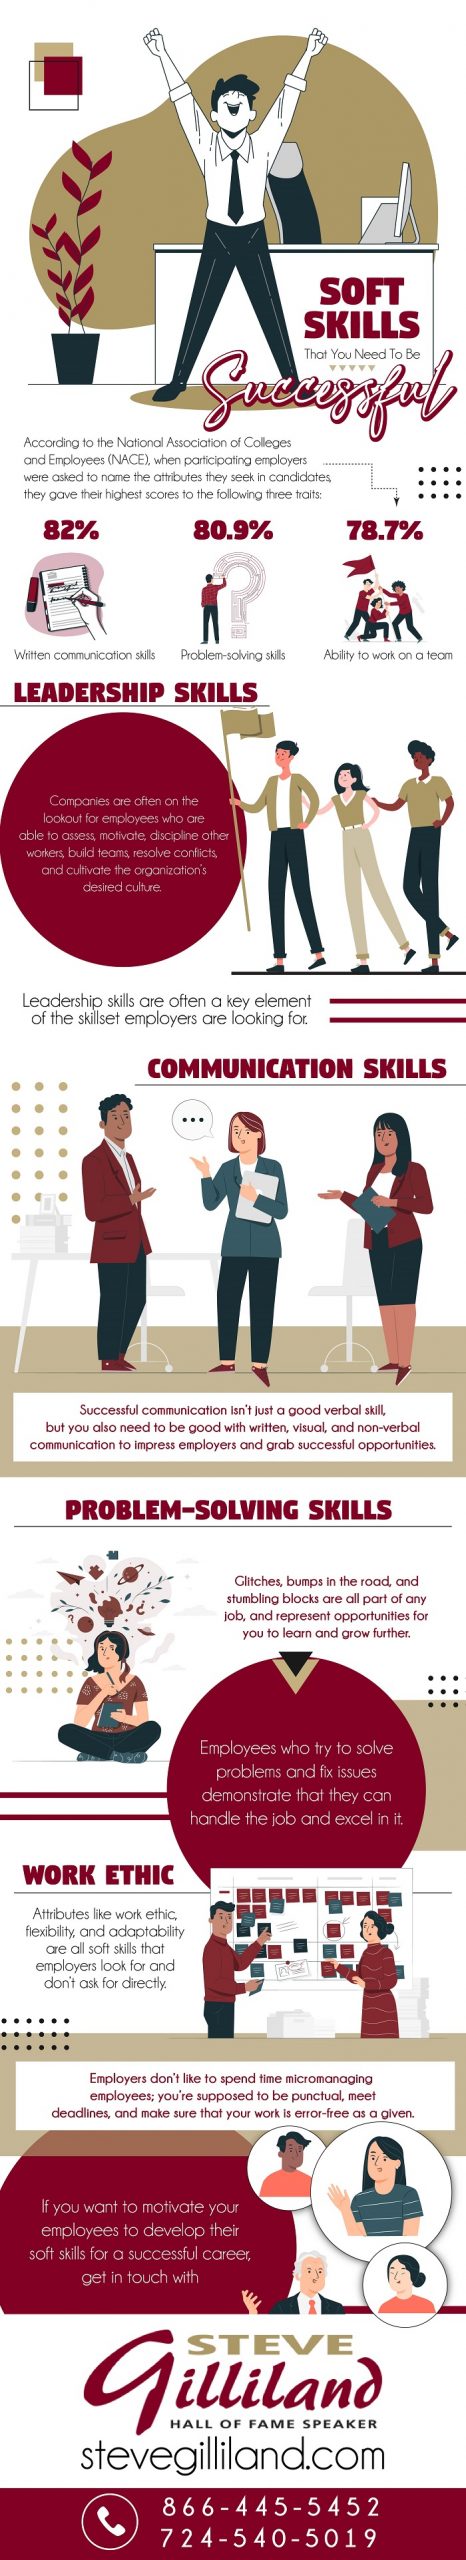 Soft Skills That You Need To Be Successful - An Infographic